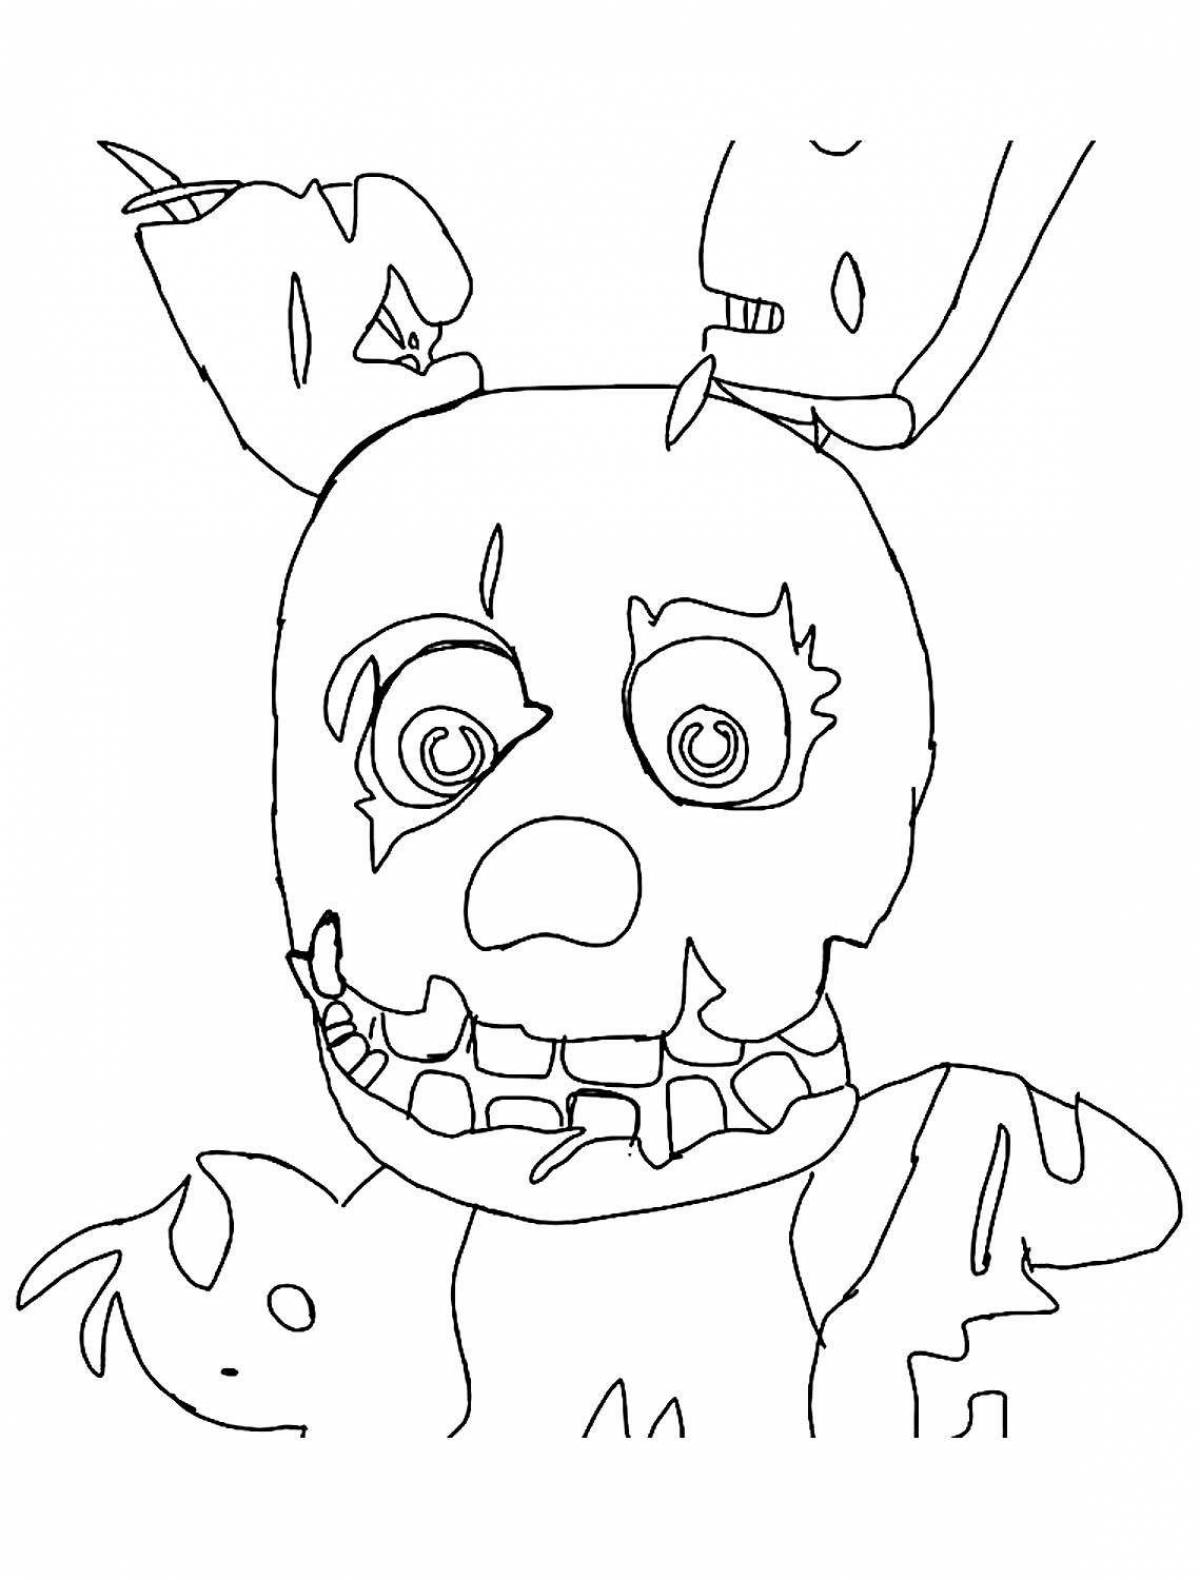 Cute fnaf chica 1 coloring page